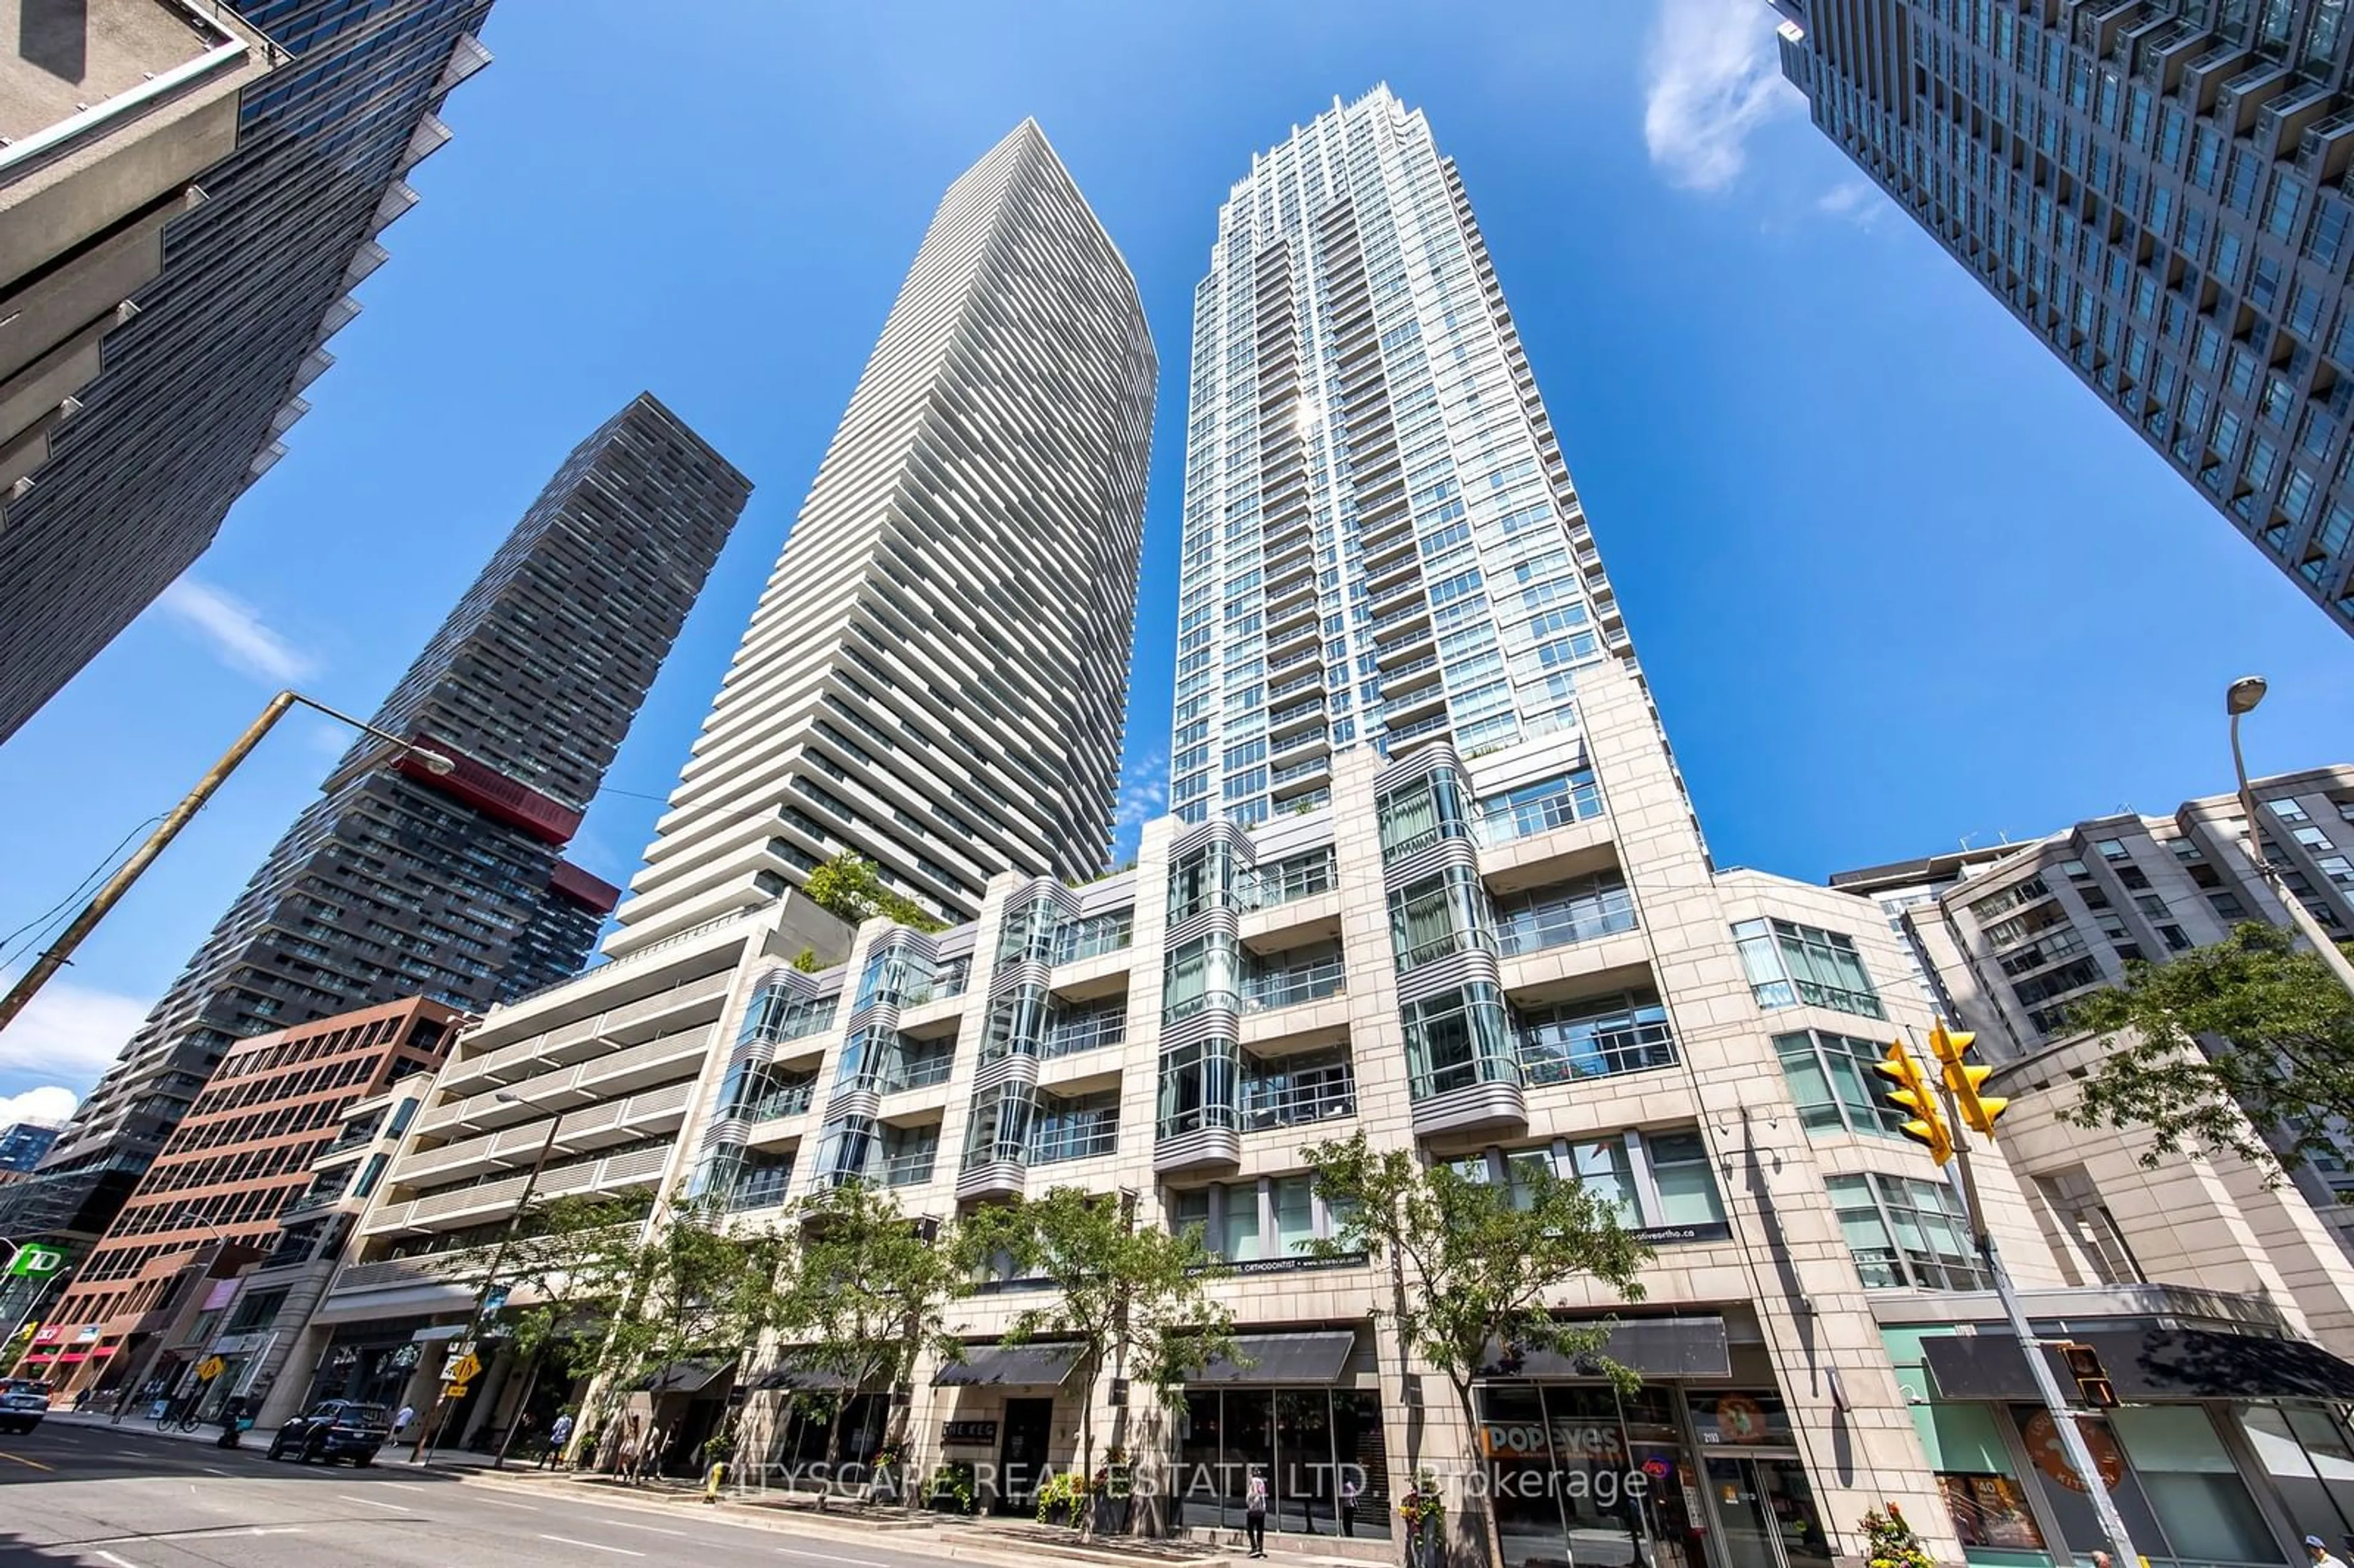 A pic from exterior of the house or condo for 2221 Yonge St #4403, Toronto Ontario M4S 2B4